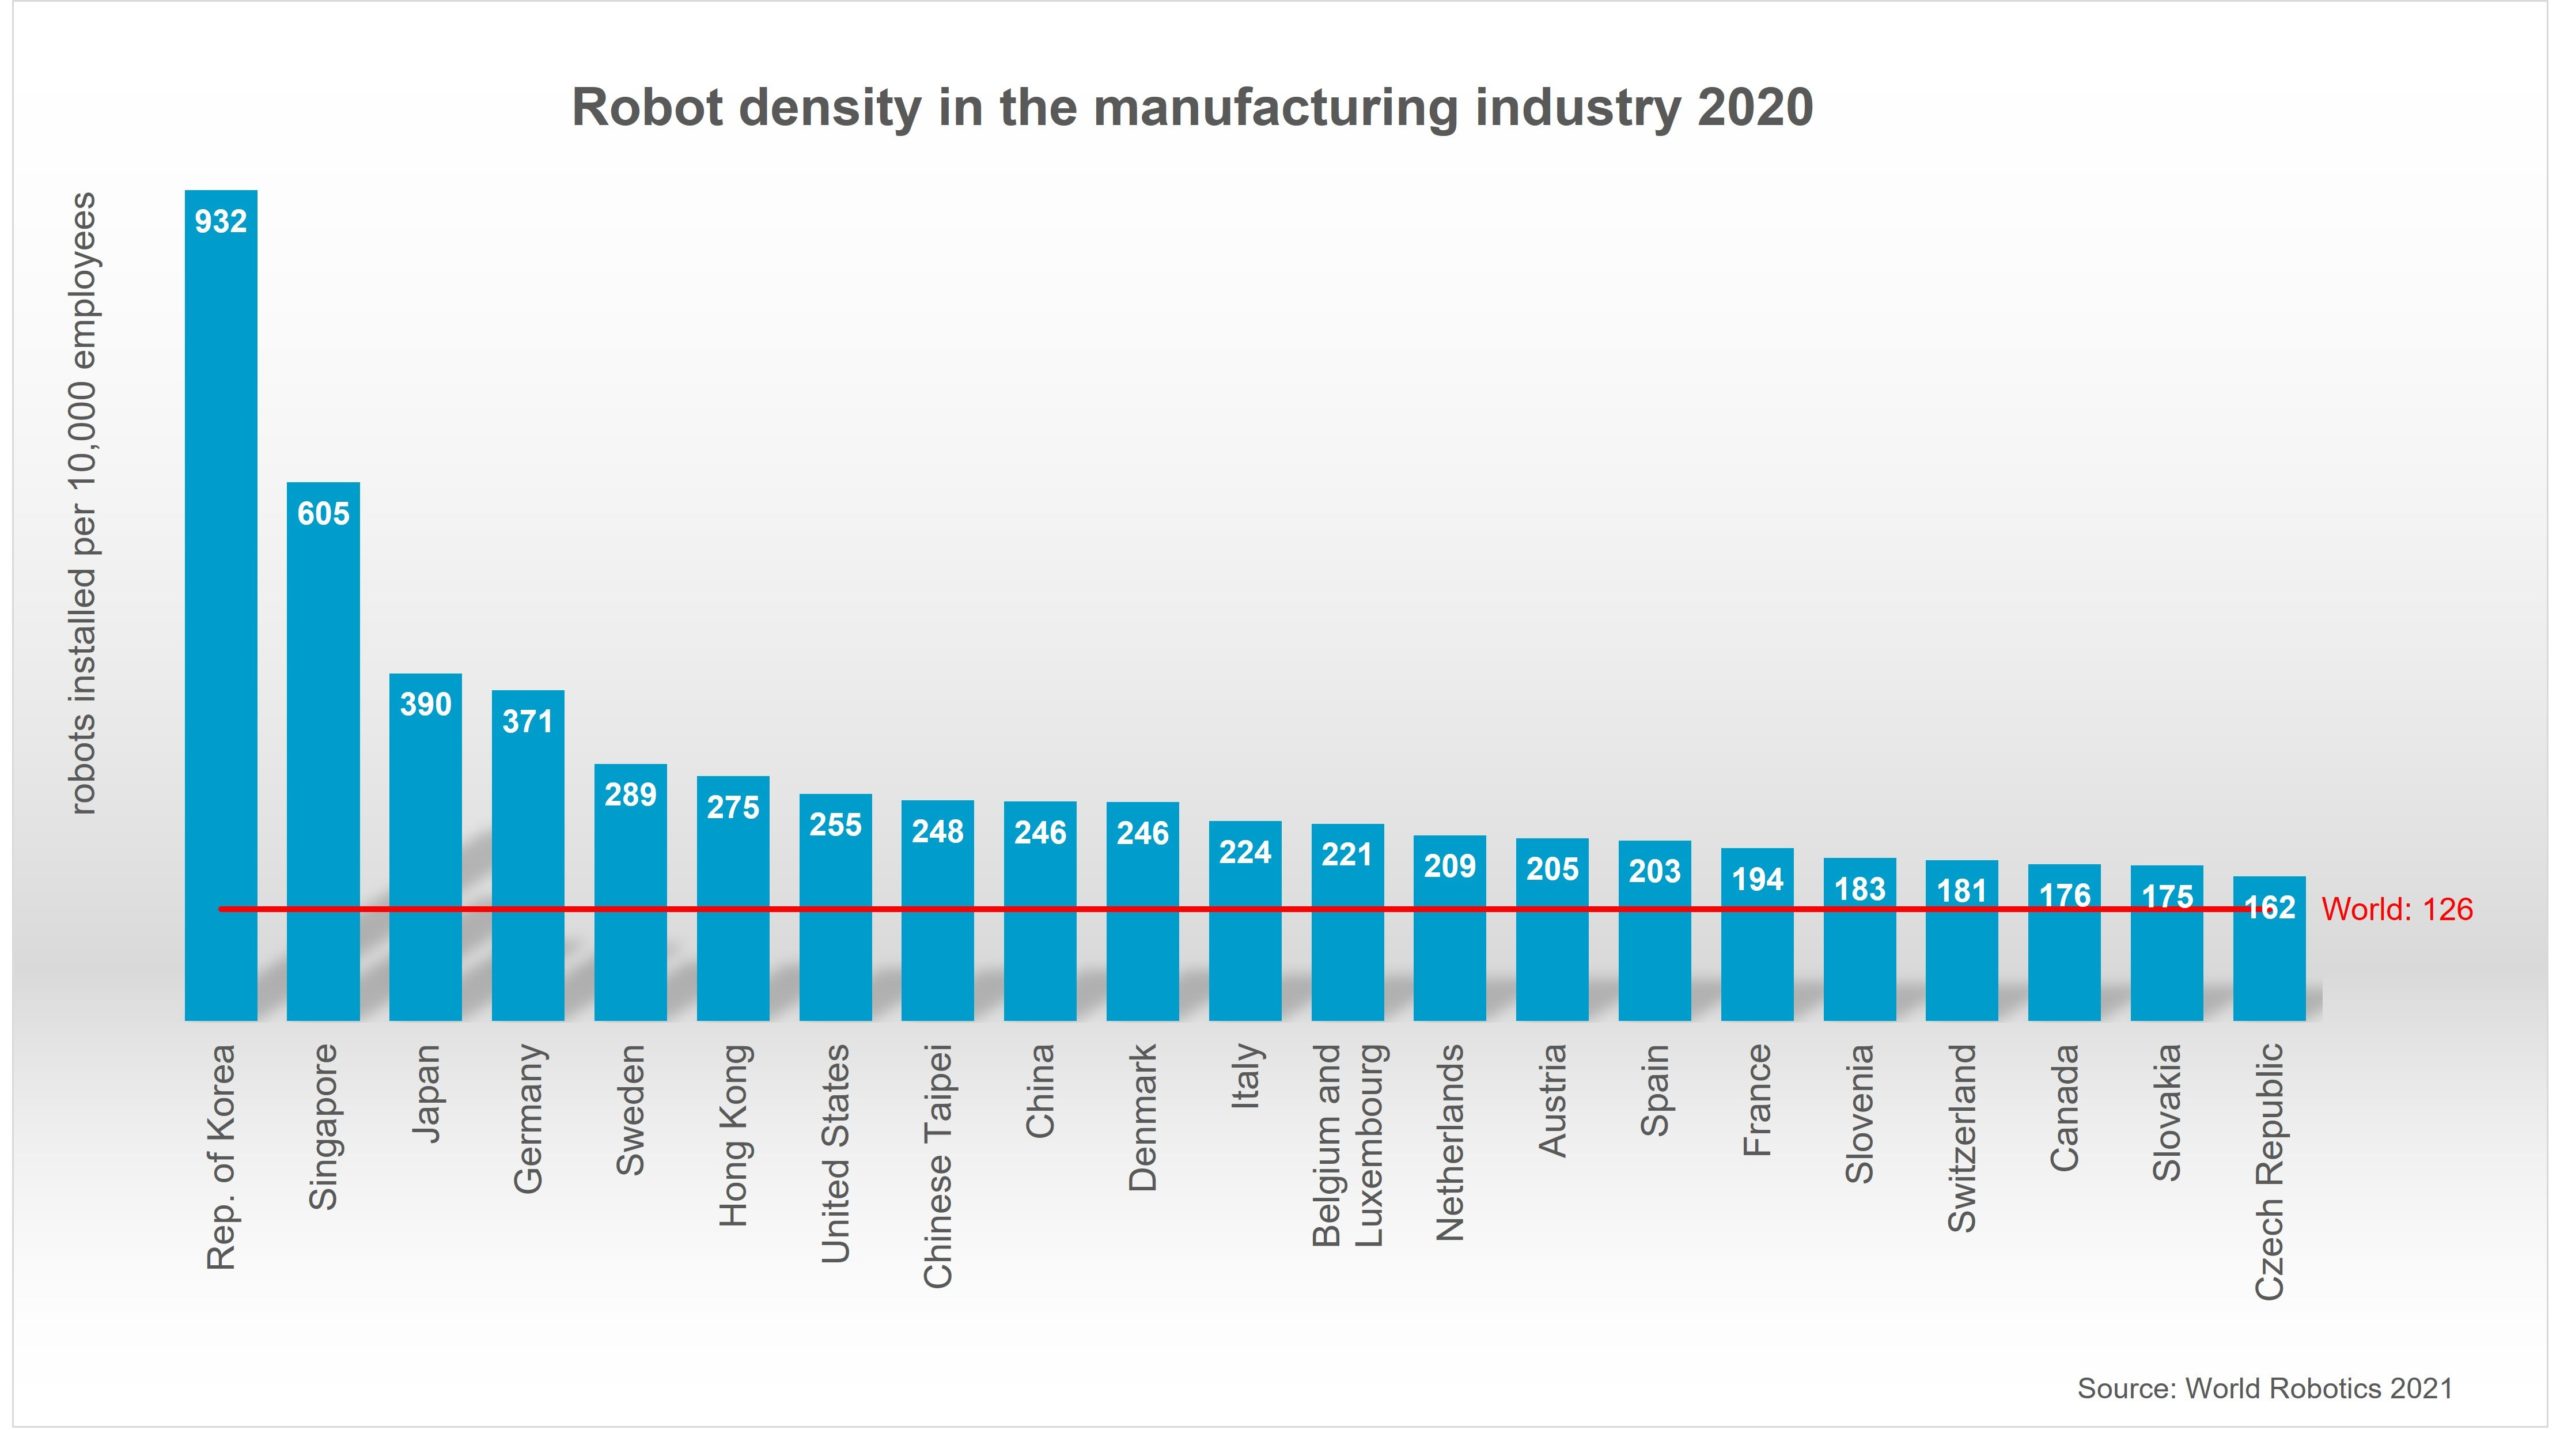 Robot density per 10,000 employees across countries